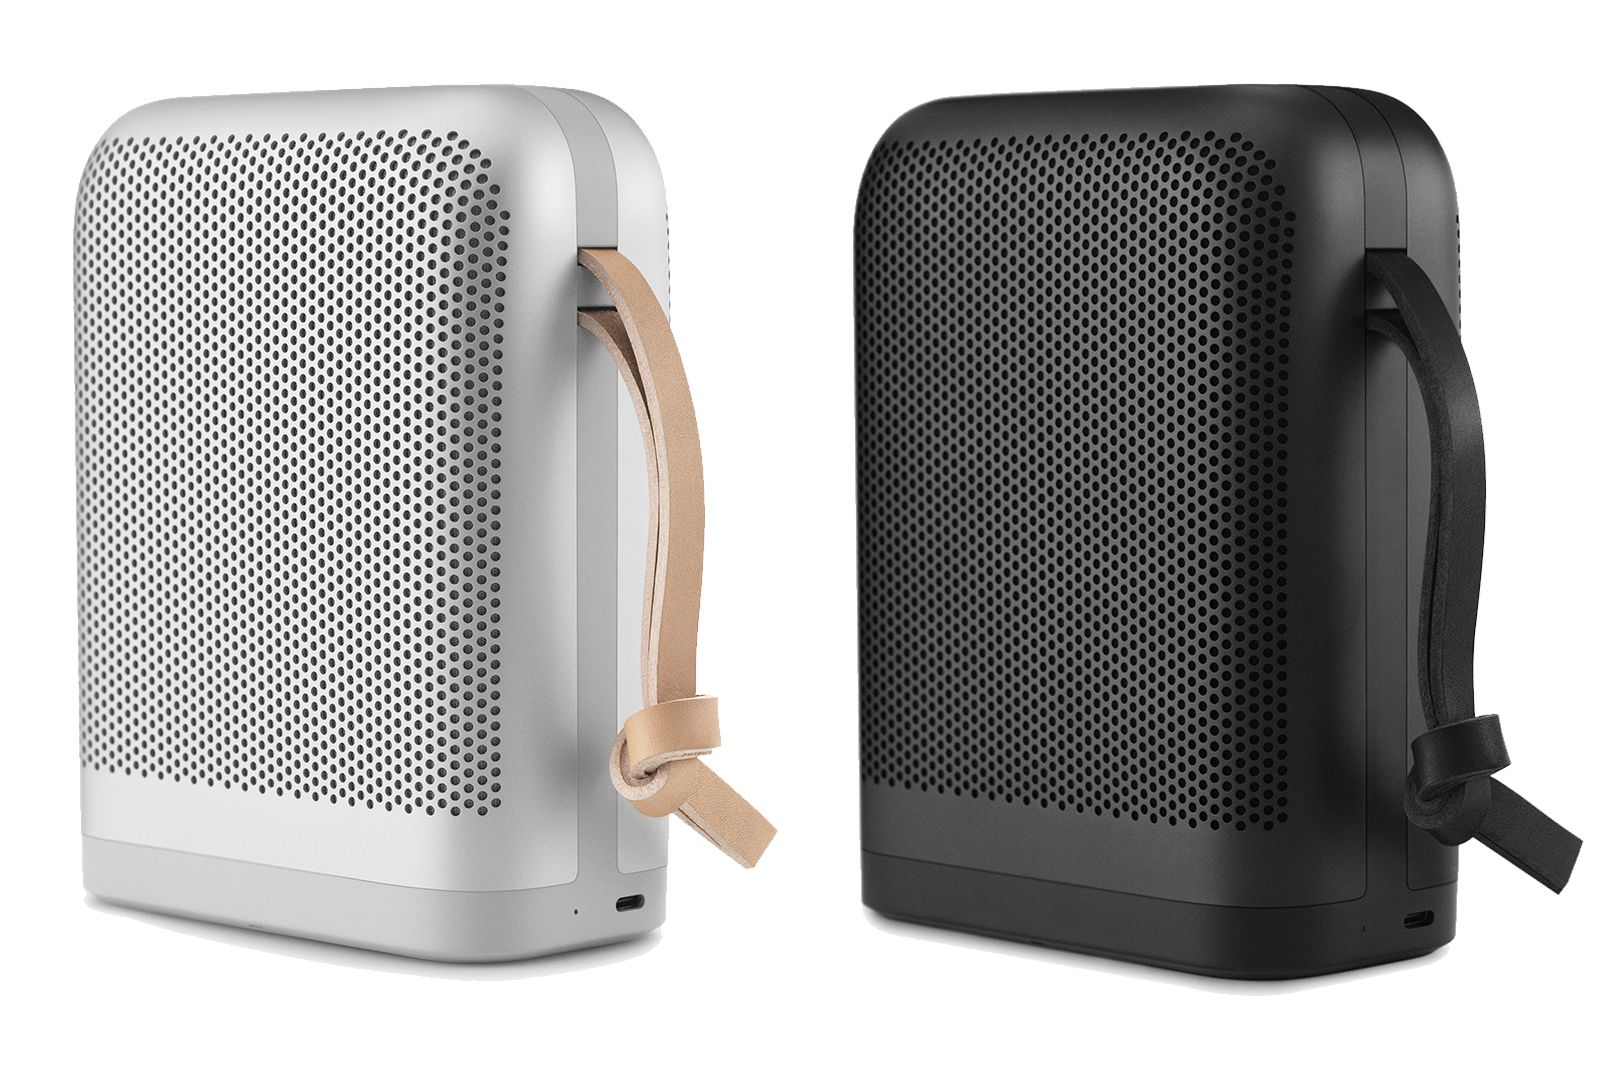 BO Play launches Beoplay P6 as a powerful portable Bluetooth speaker image 1